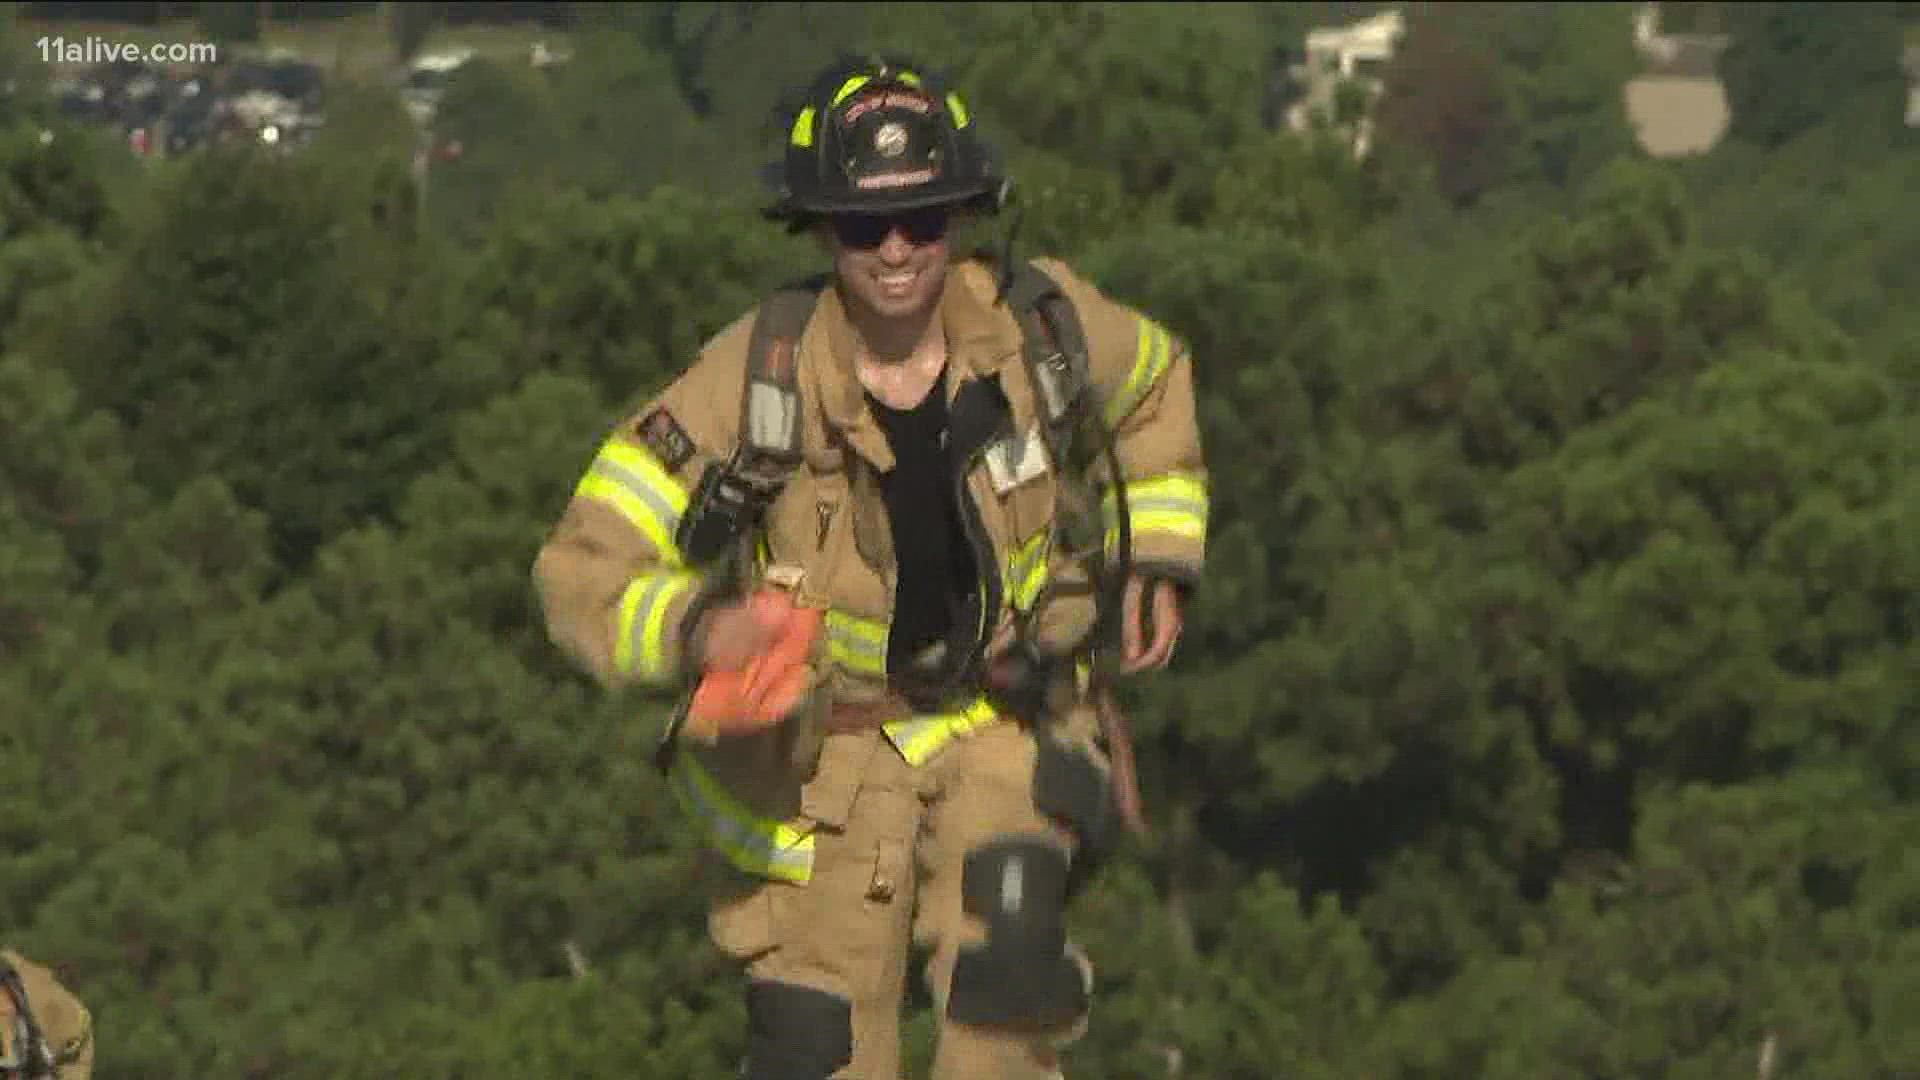 Firefighters from across Georgia paid tribute to the 343 firefighter killed during the attacks on 9/11 by hiking up Stone Mountain dressed out in their gear.